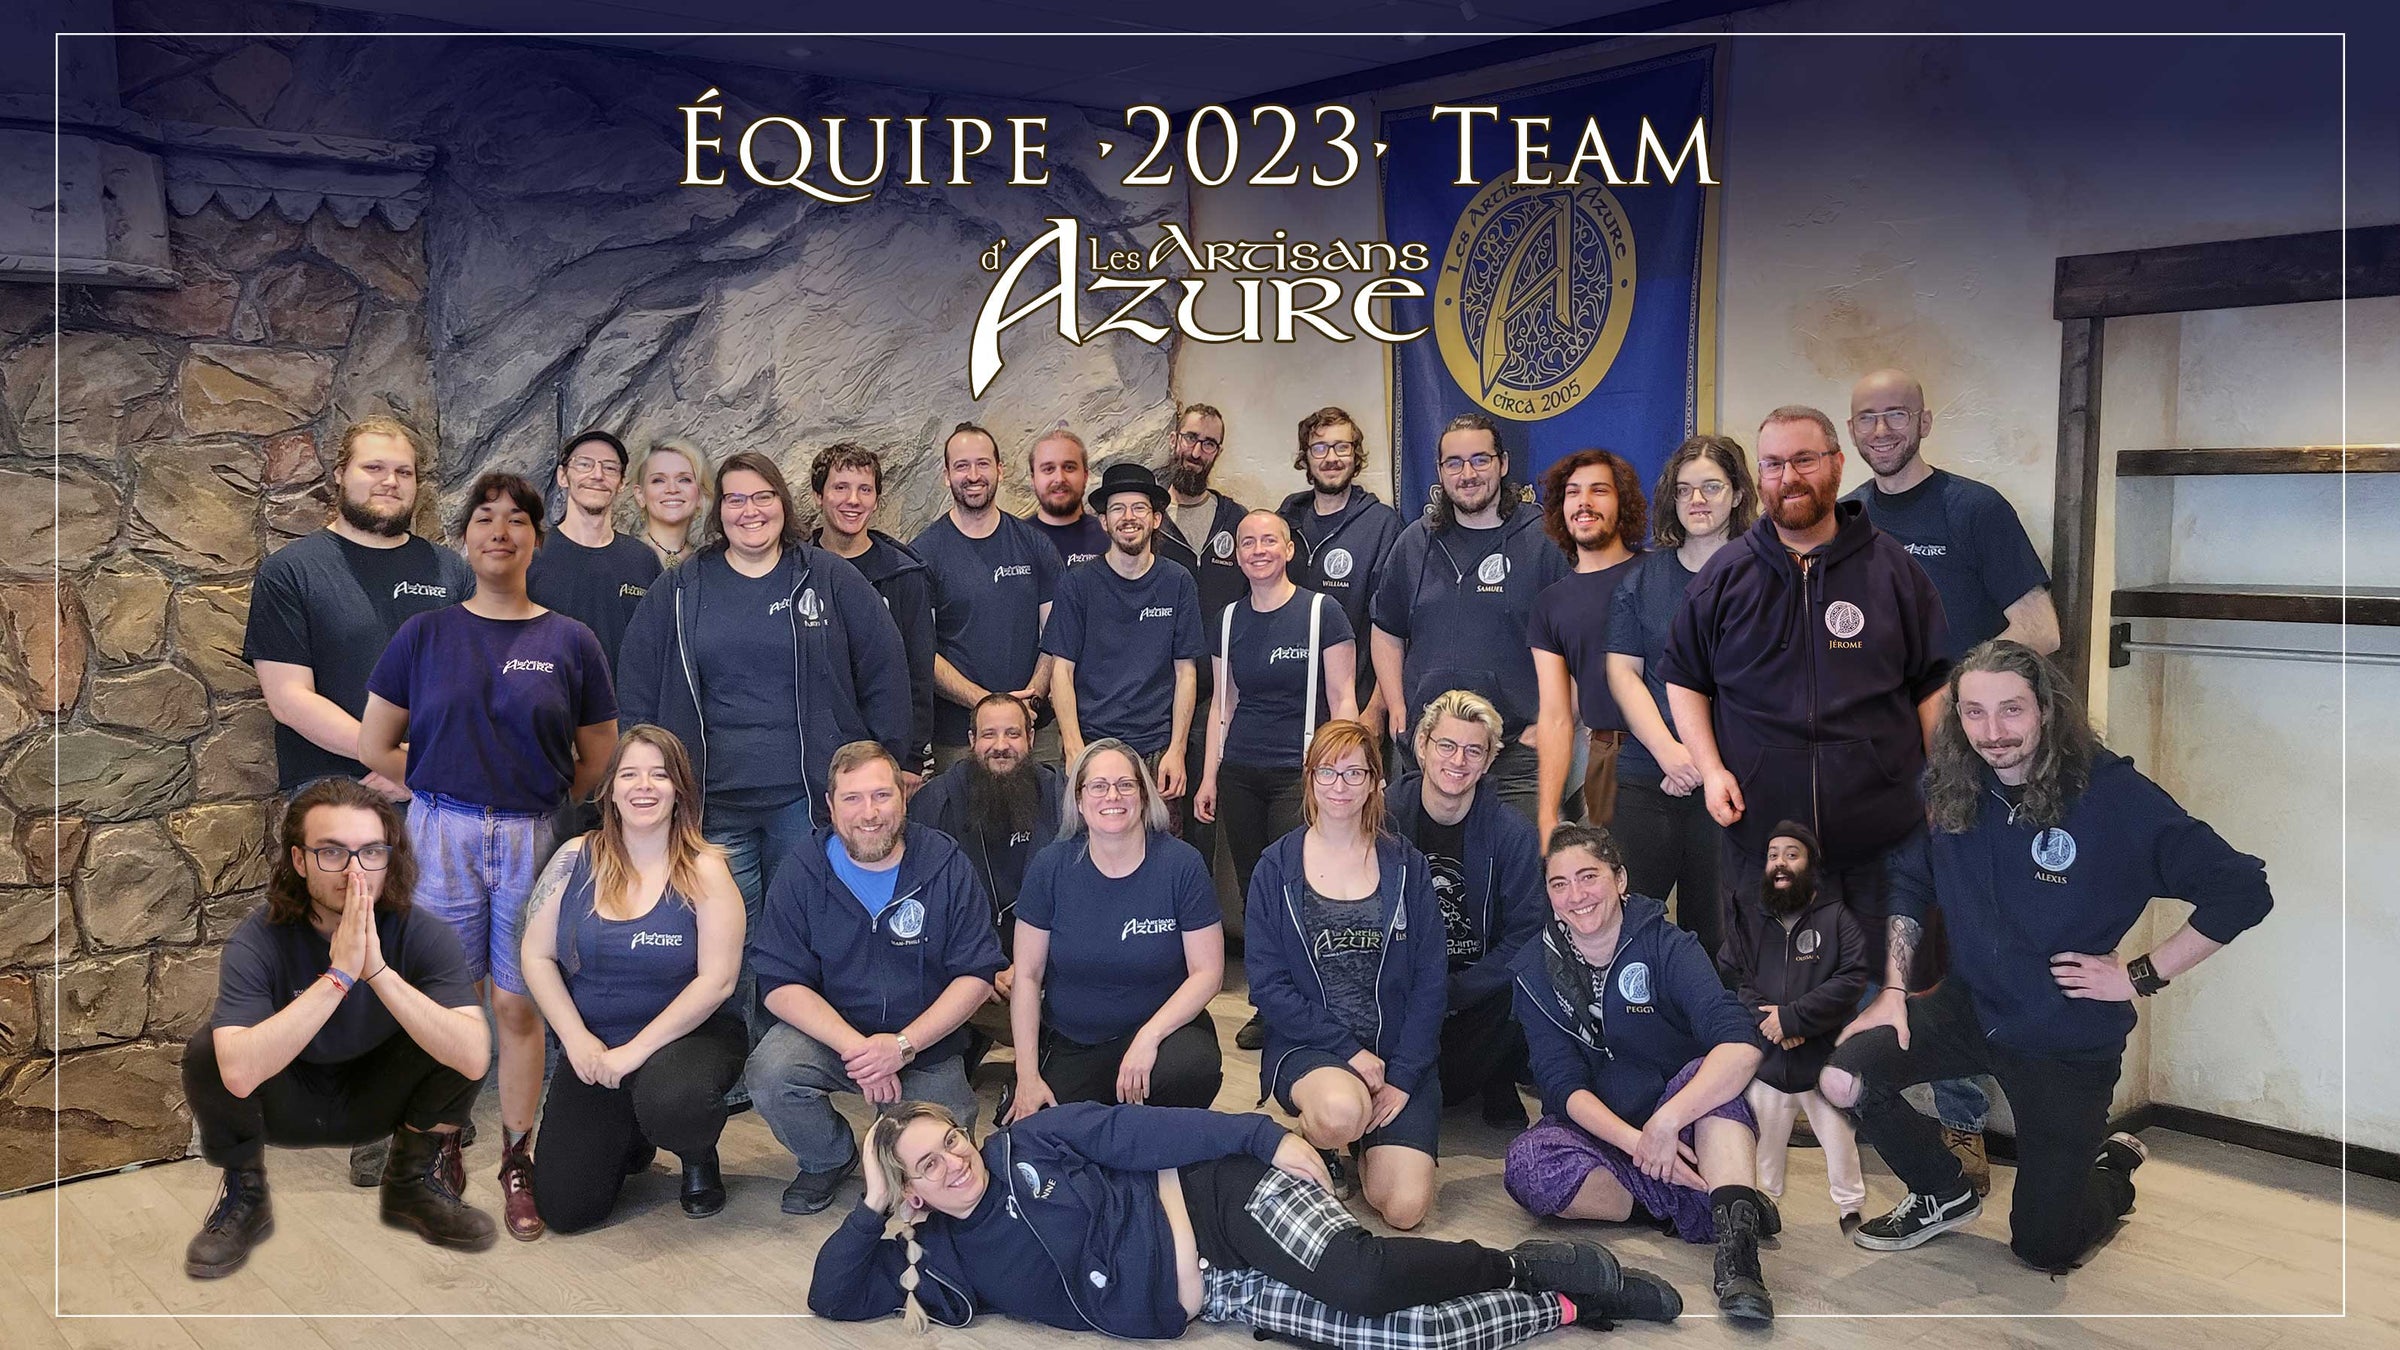 Team of les Artisans d'Azure in 2023: All our craftpeople, marchands, coordinator and director